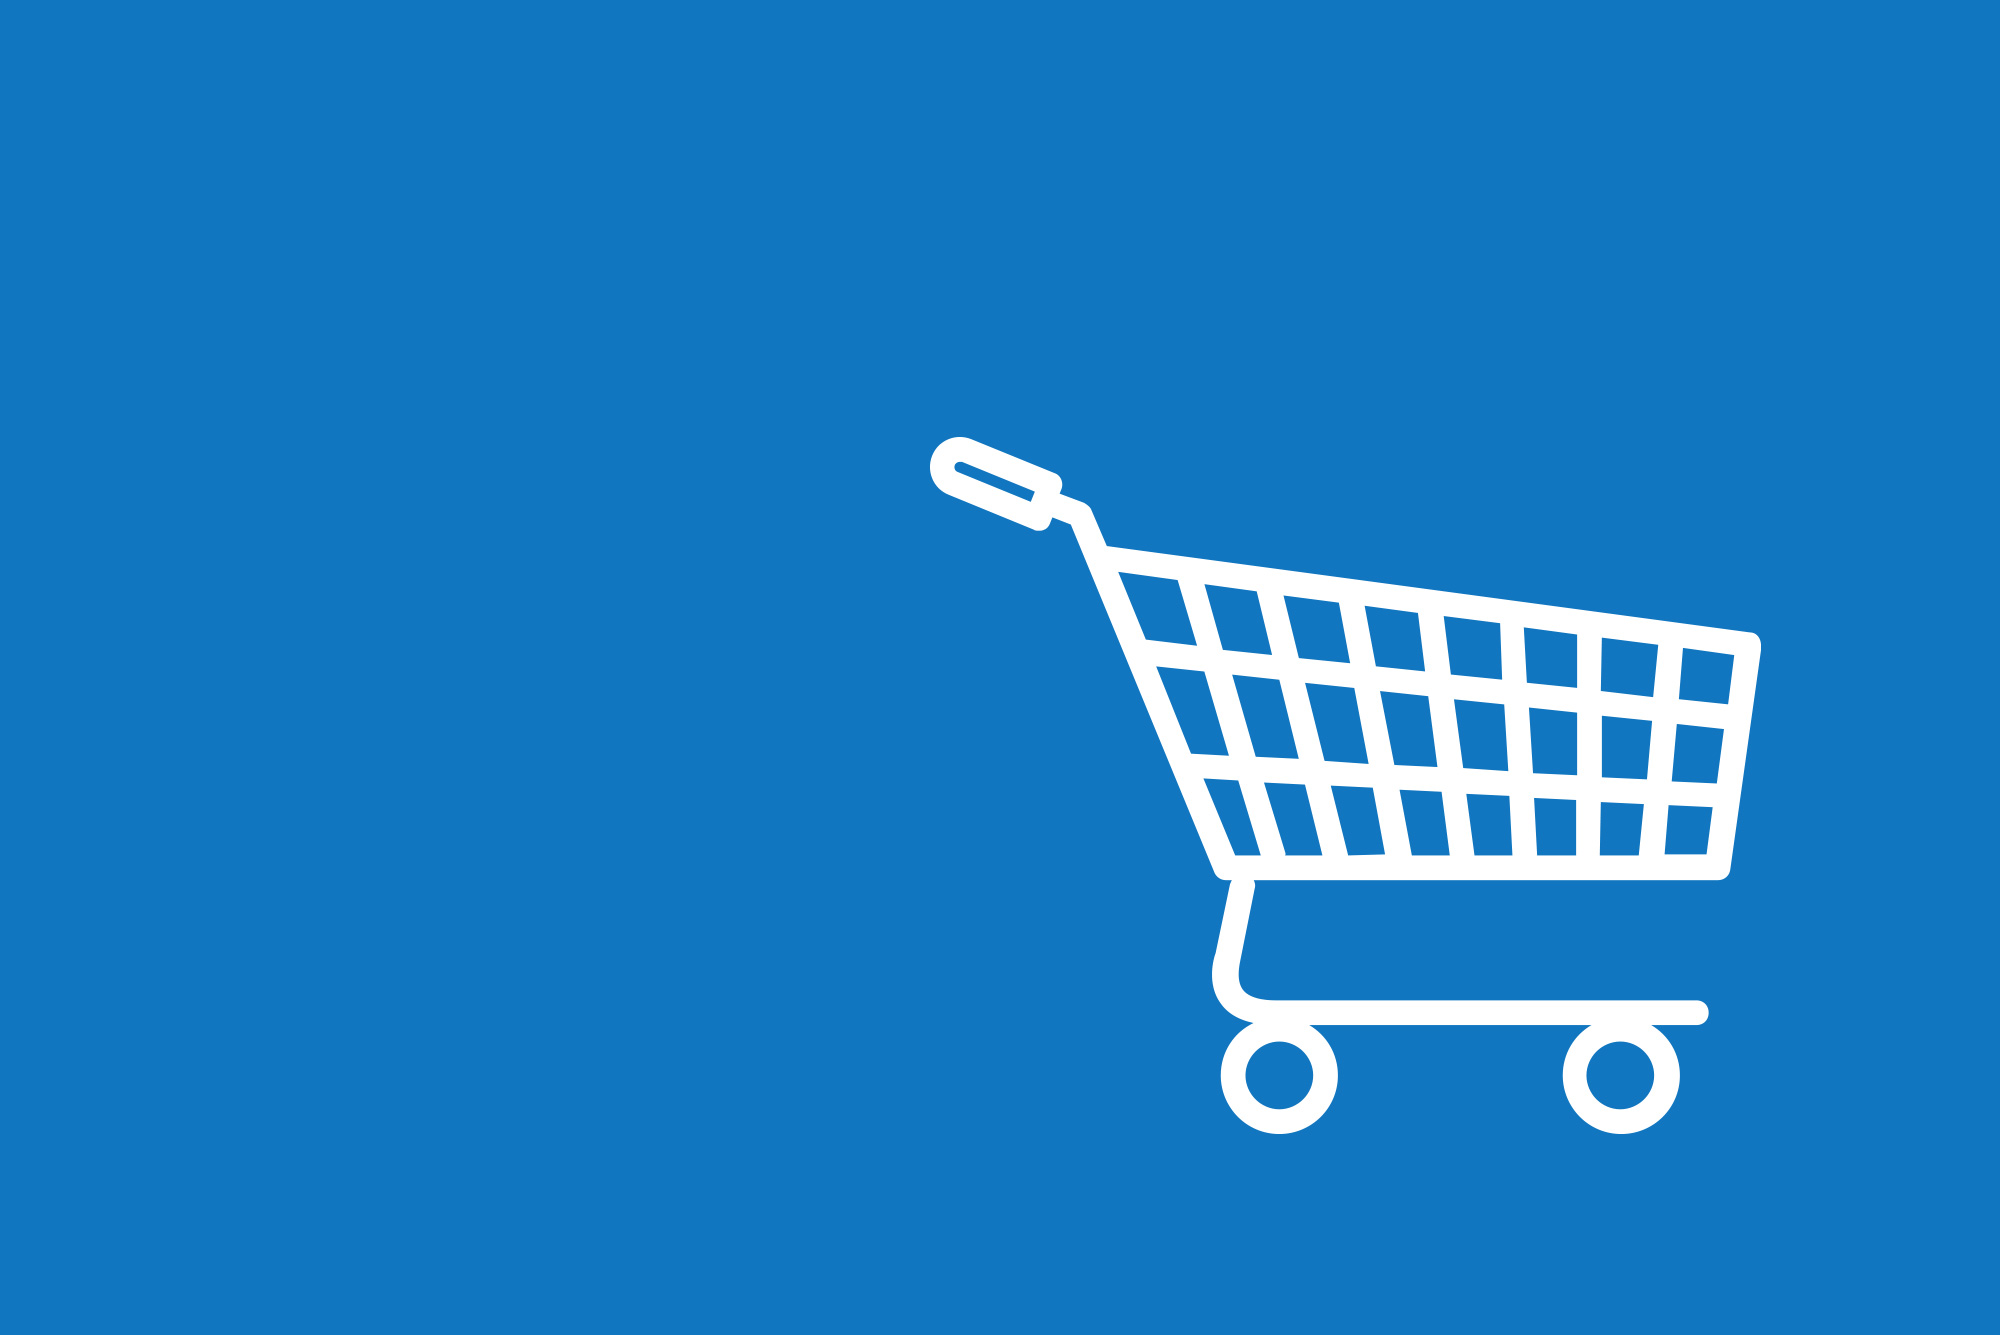 Shopping trolley icon on blue background